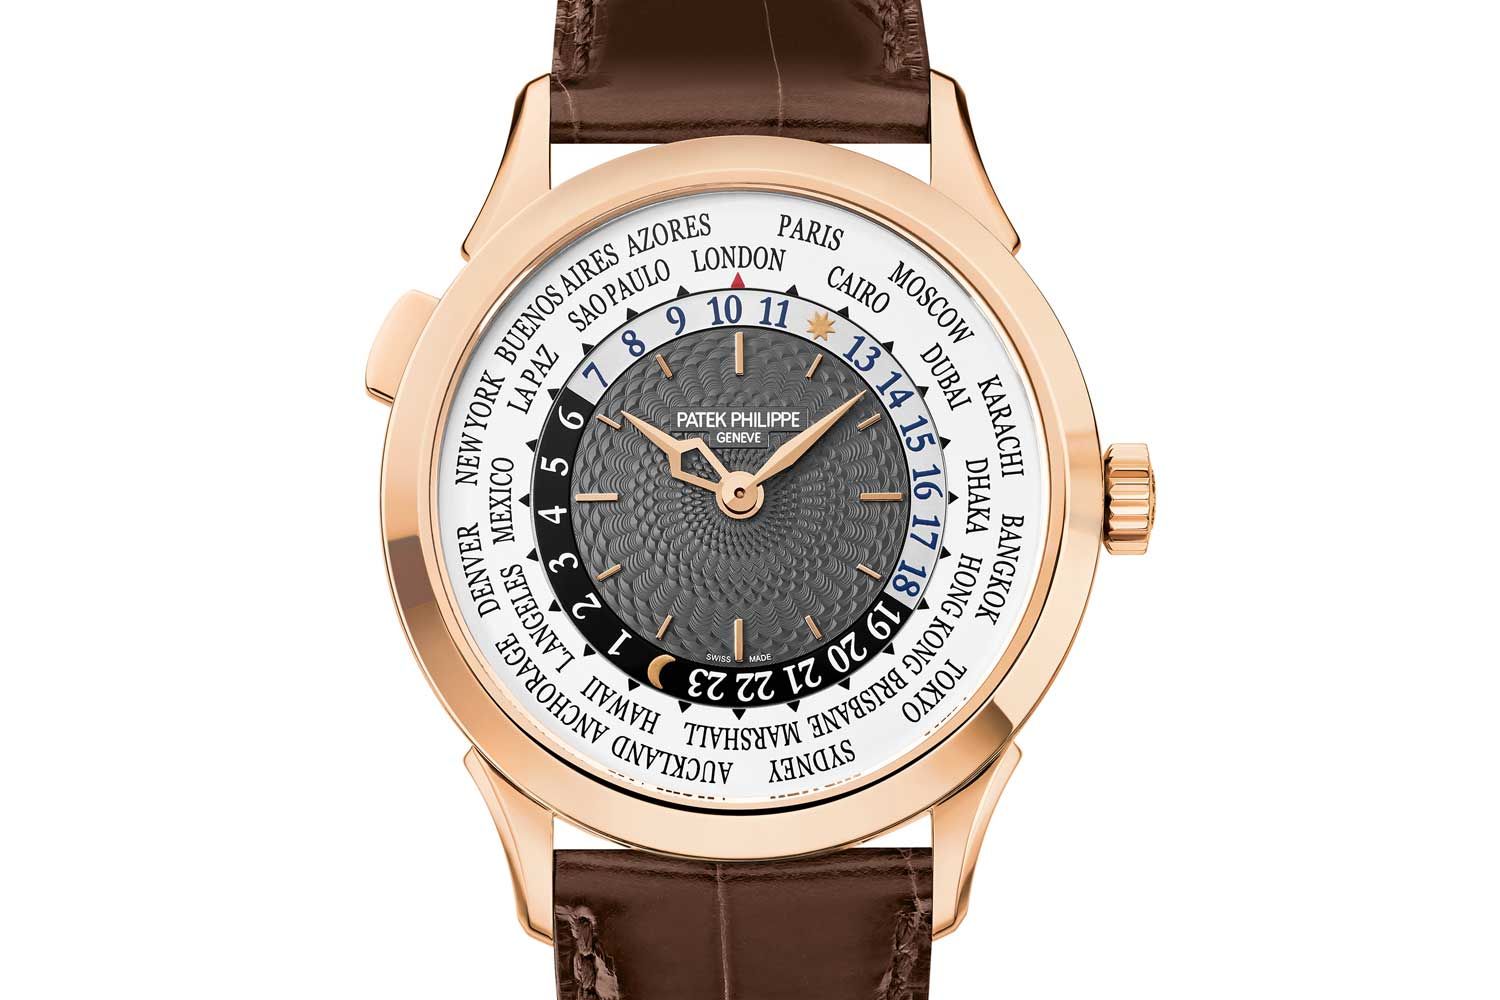 The watch’s dial featured the most elaborate guilloché pattern yet with subtle waves radiating from the cannon pinion, abbreviated by appealing and original flat, wide teardrop shaped elements. (Image: Patek Philippe)